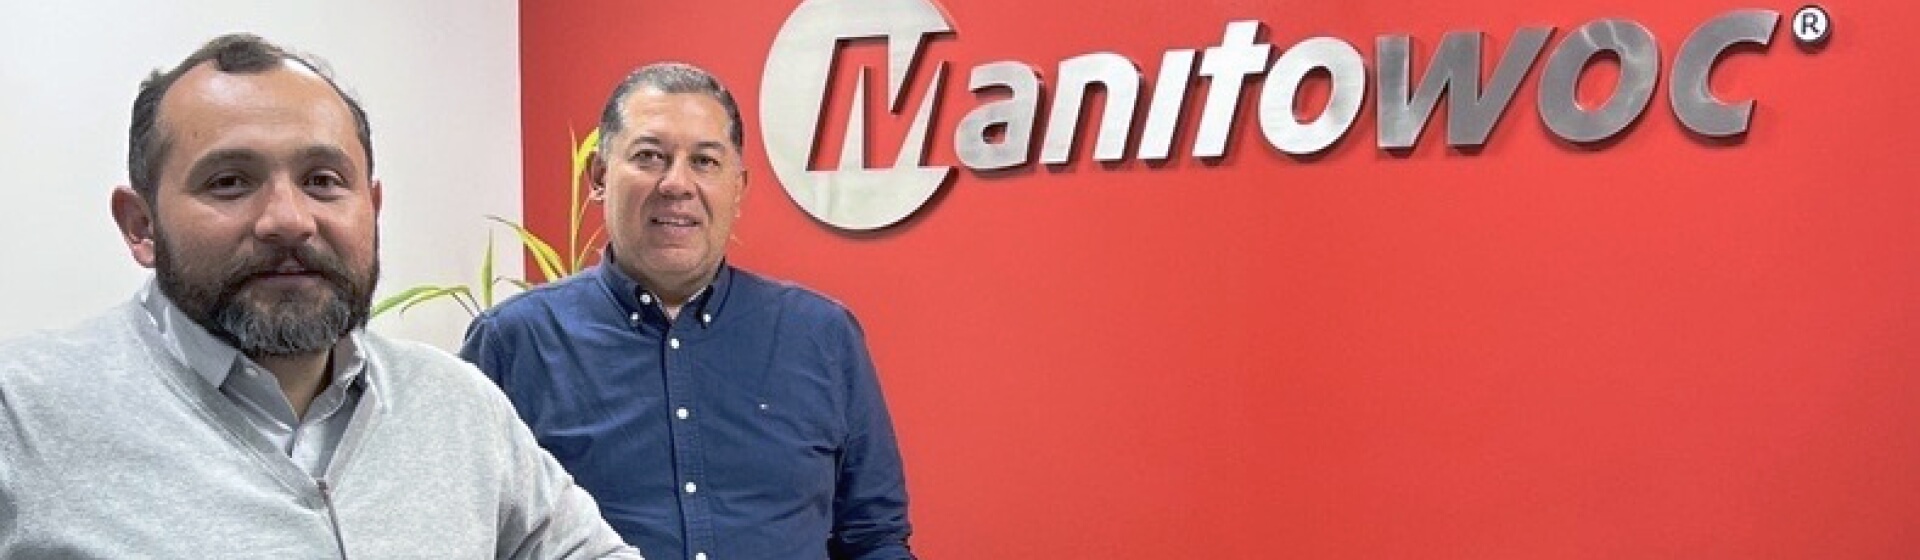 Manitowoc-improves-customer-support-in-Latin-America-with-its-new-office-in-Peru.jpg